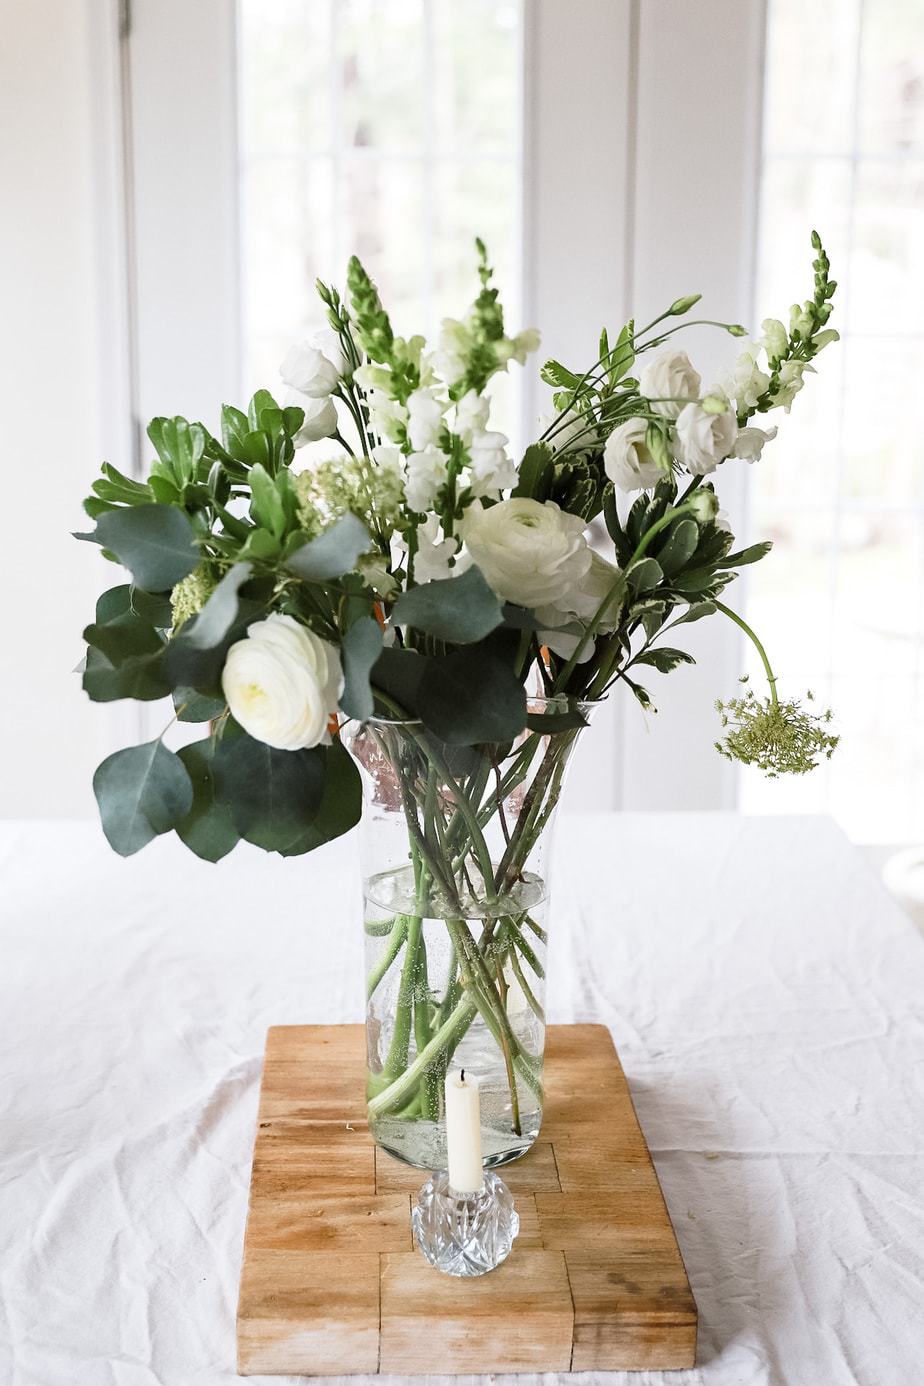 How to get Fresh Floral Arrangements all Year Long!